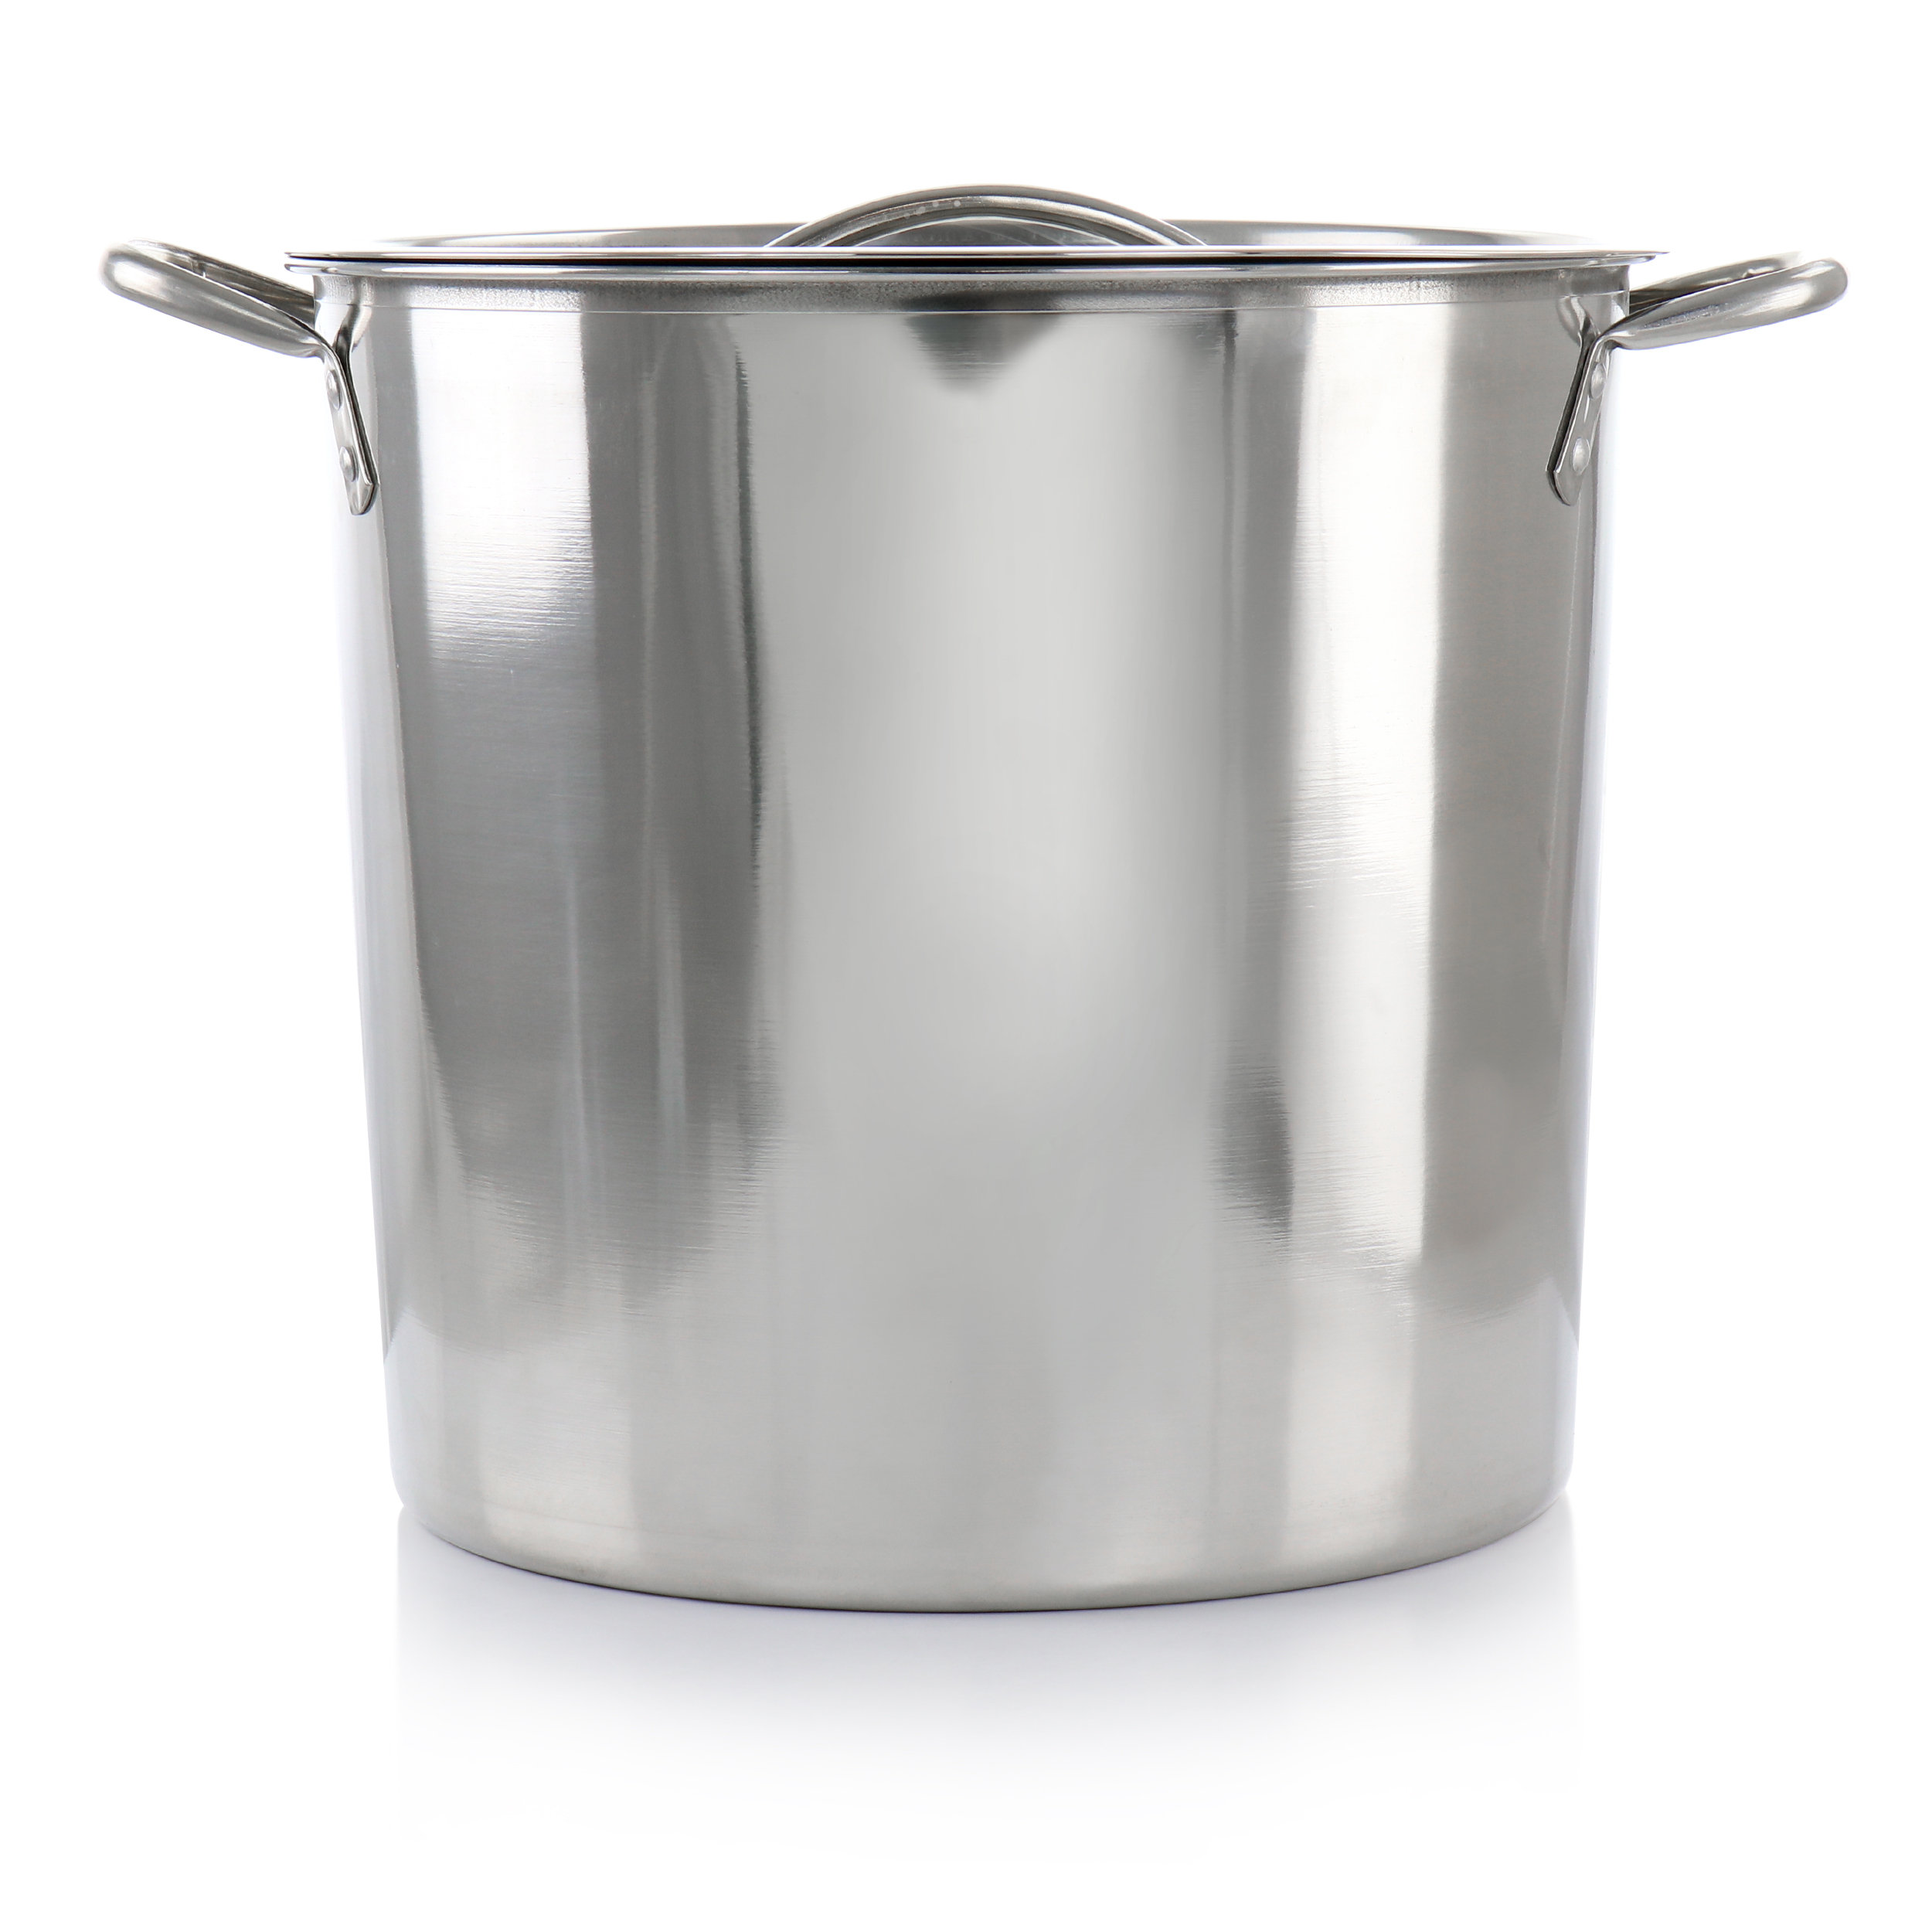 Gibson Everyday 16 Quarts Stainless Steel Stock Pot